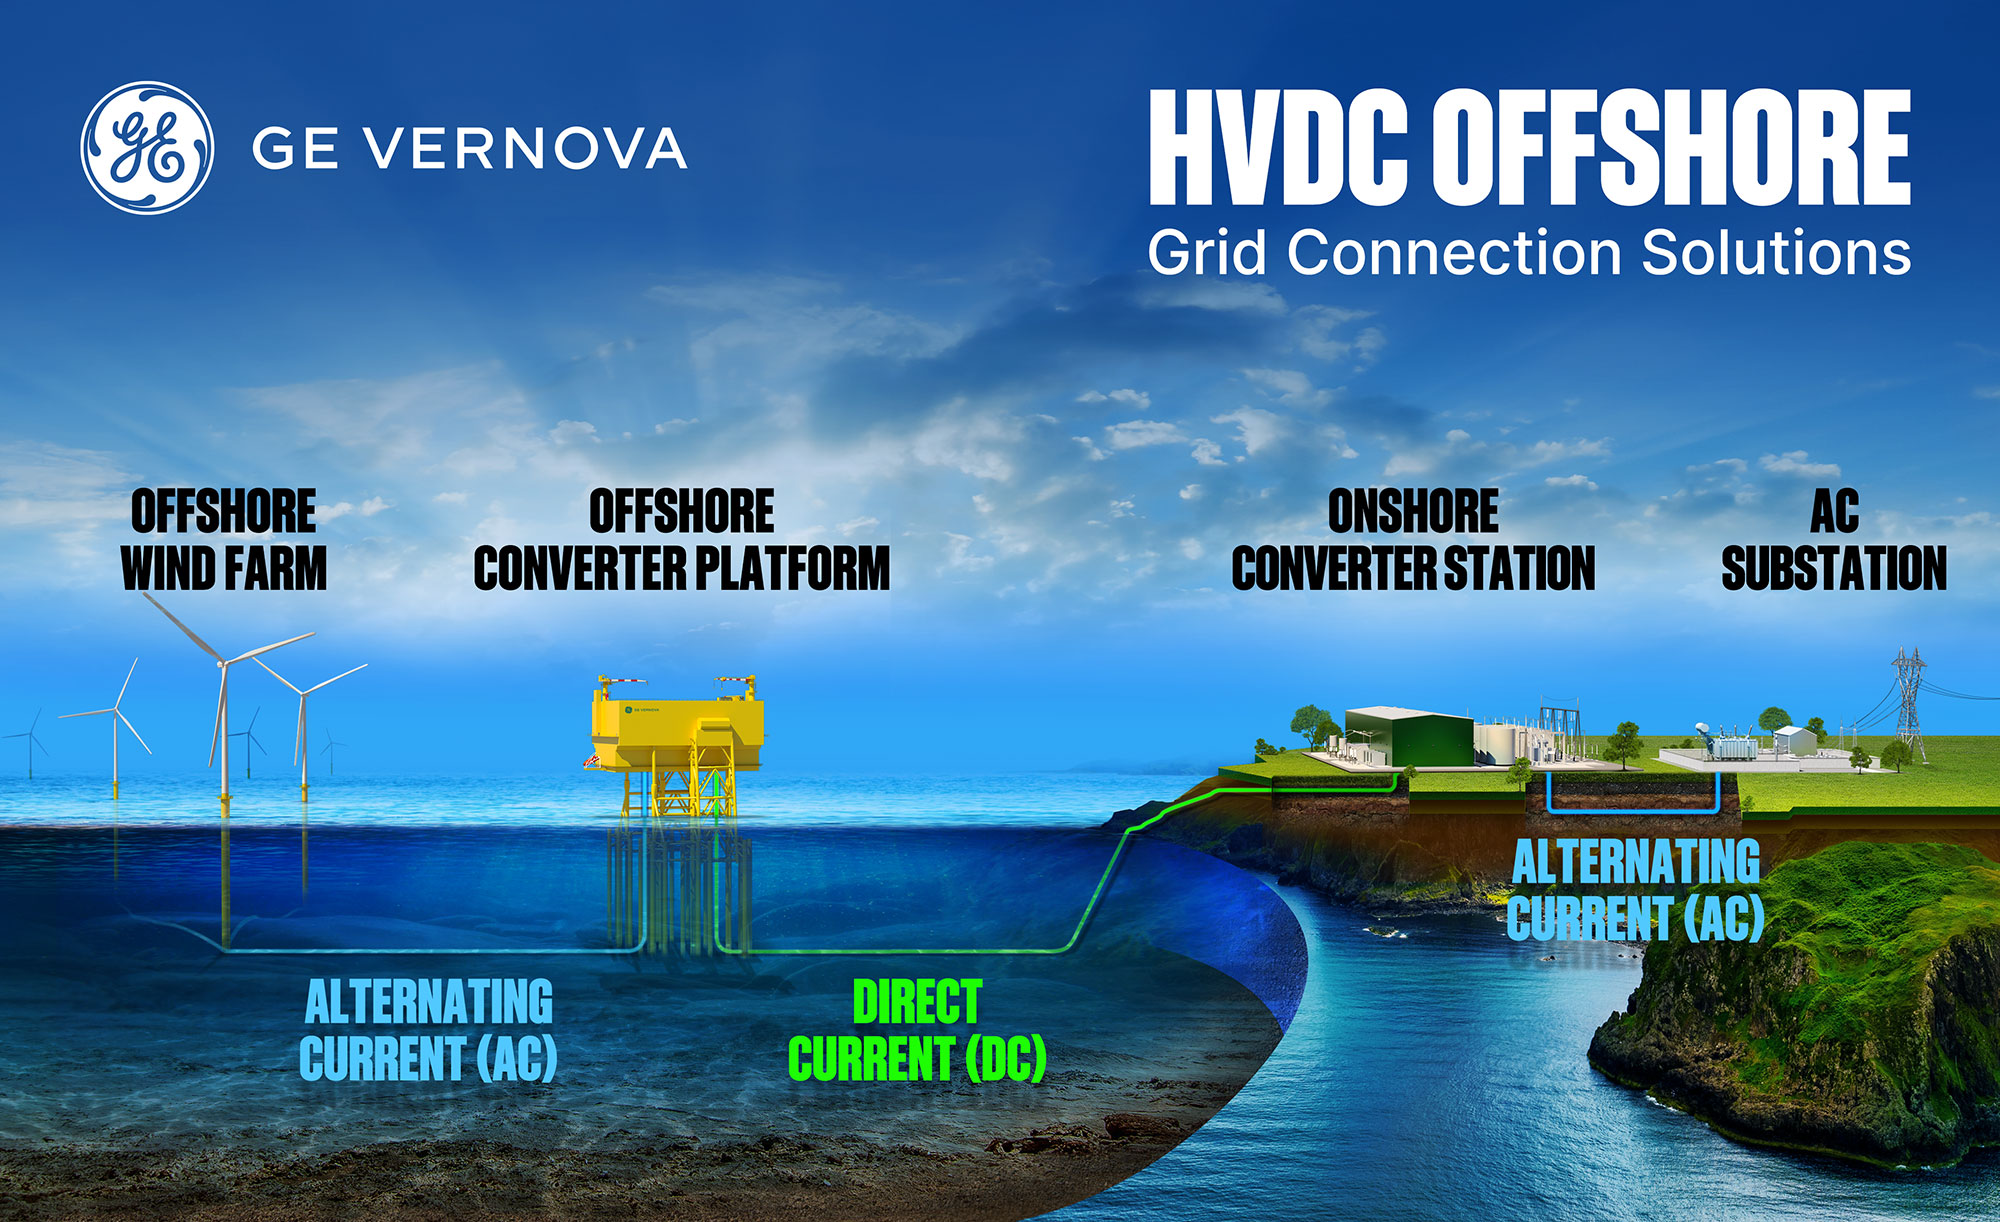 HVDC Offshore Grid Connection Solutions